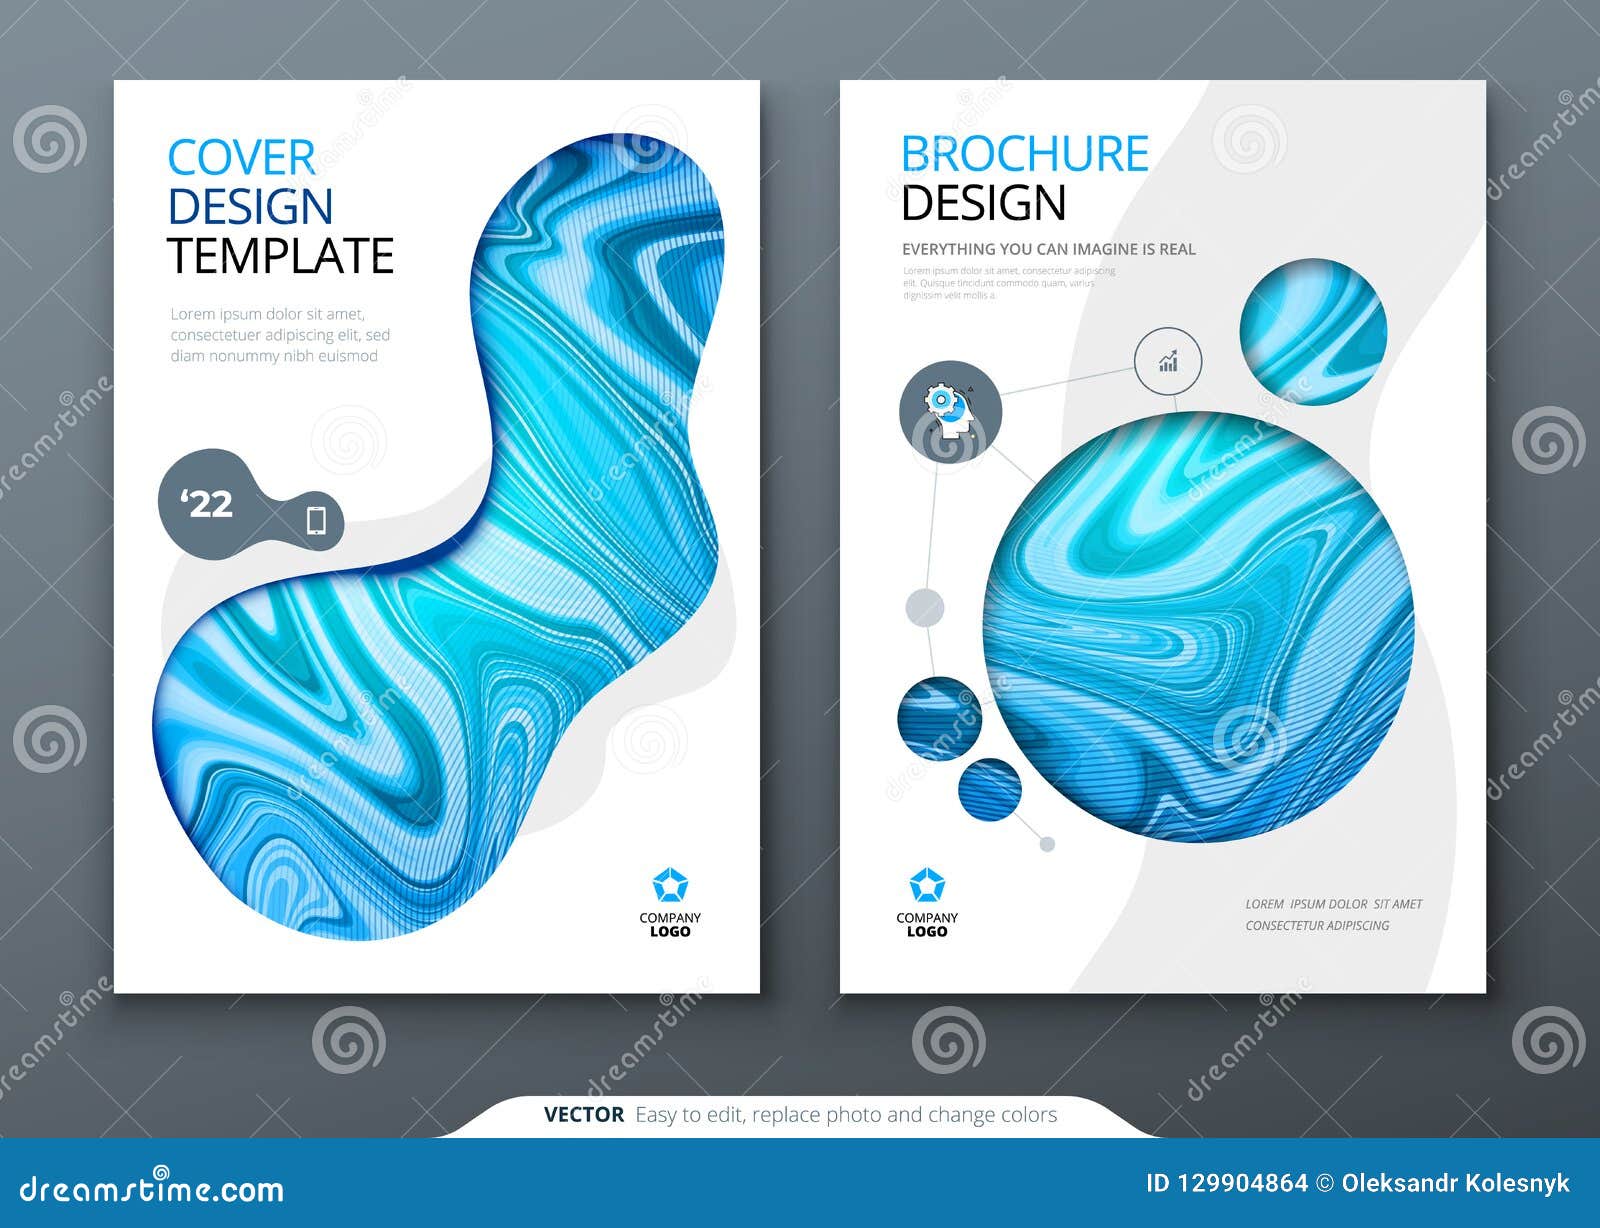 Download Brochure Template Layout Design Corporate Business Annual Report Catalog Magazine Flyer Mockup Creative Modern Stock Vector Illustration Of Internet Layout 129904864